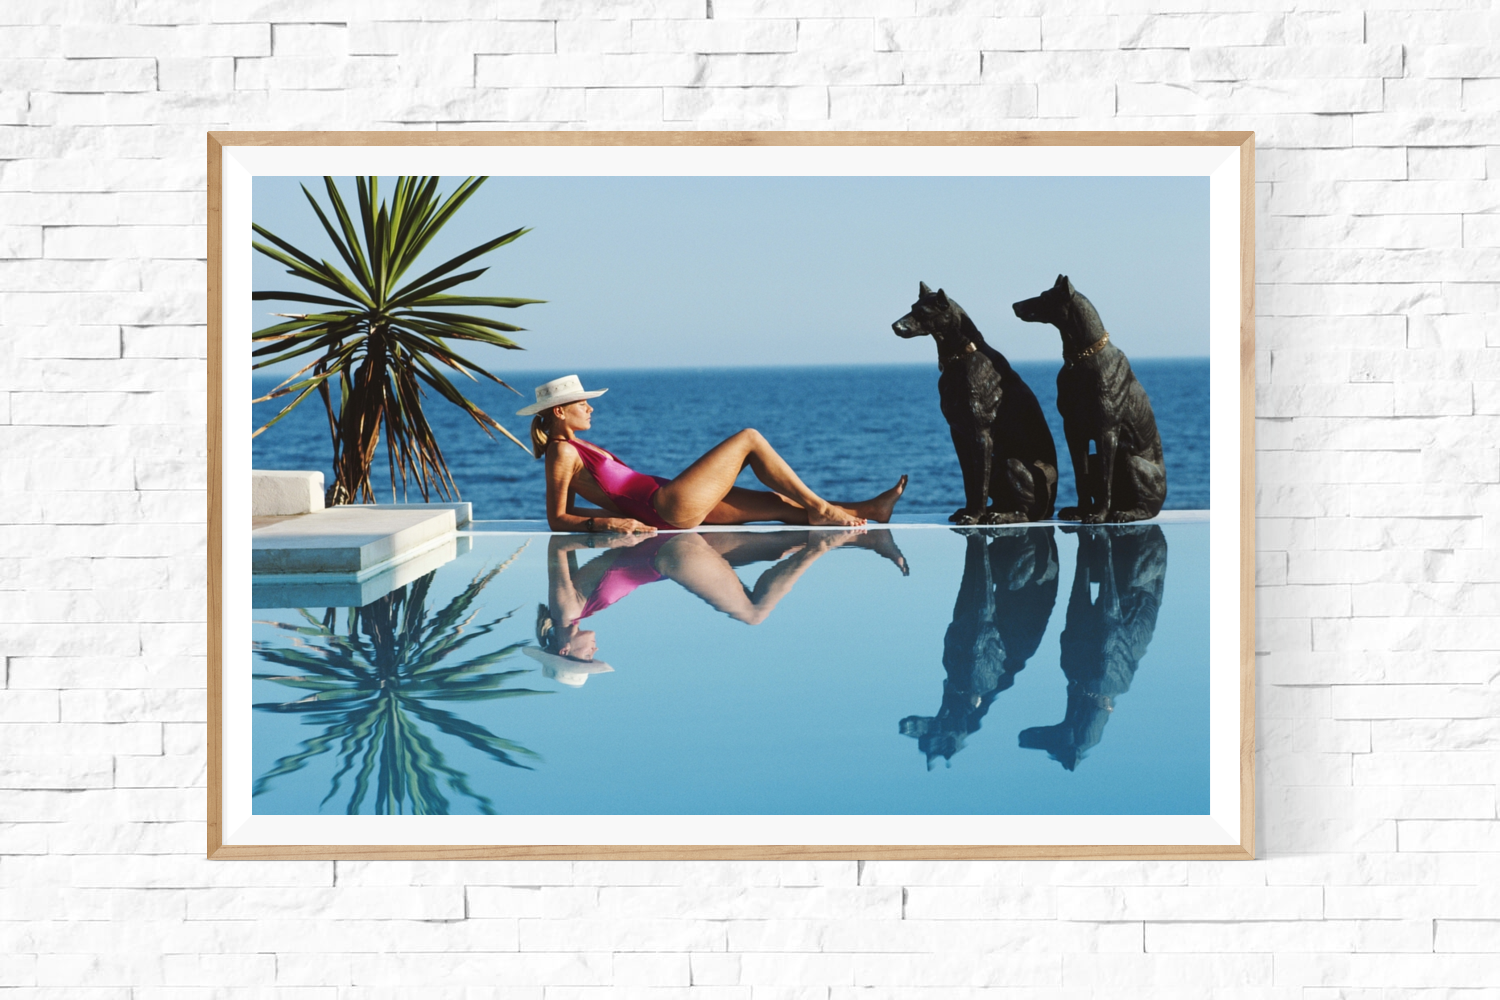 Framed Slim Aarons: Pantz Pool photo for sale Getty Images Gallery